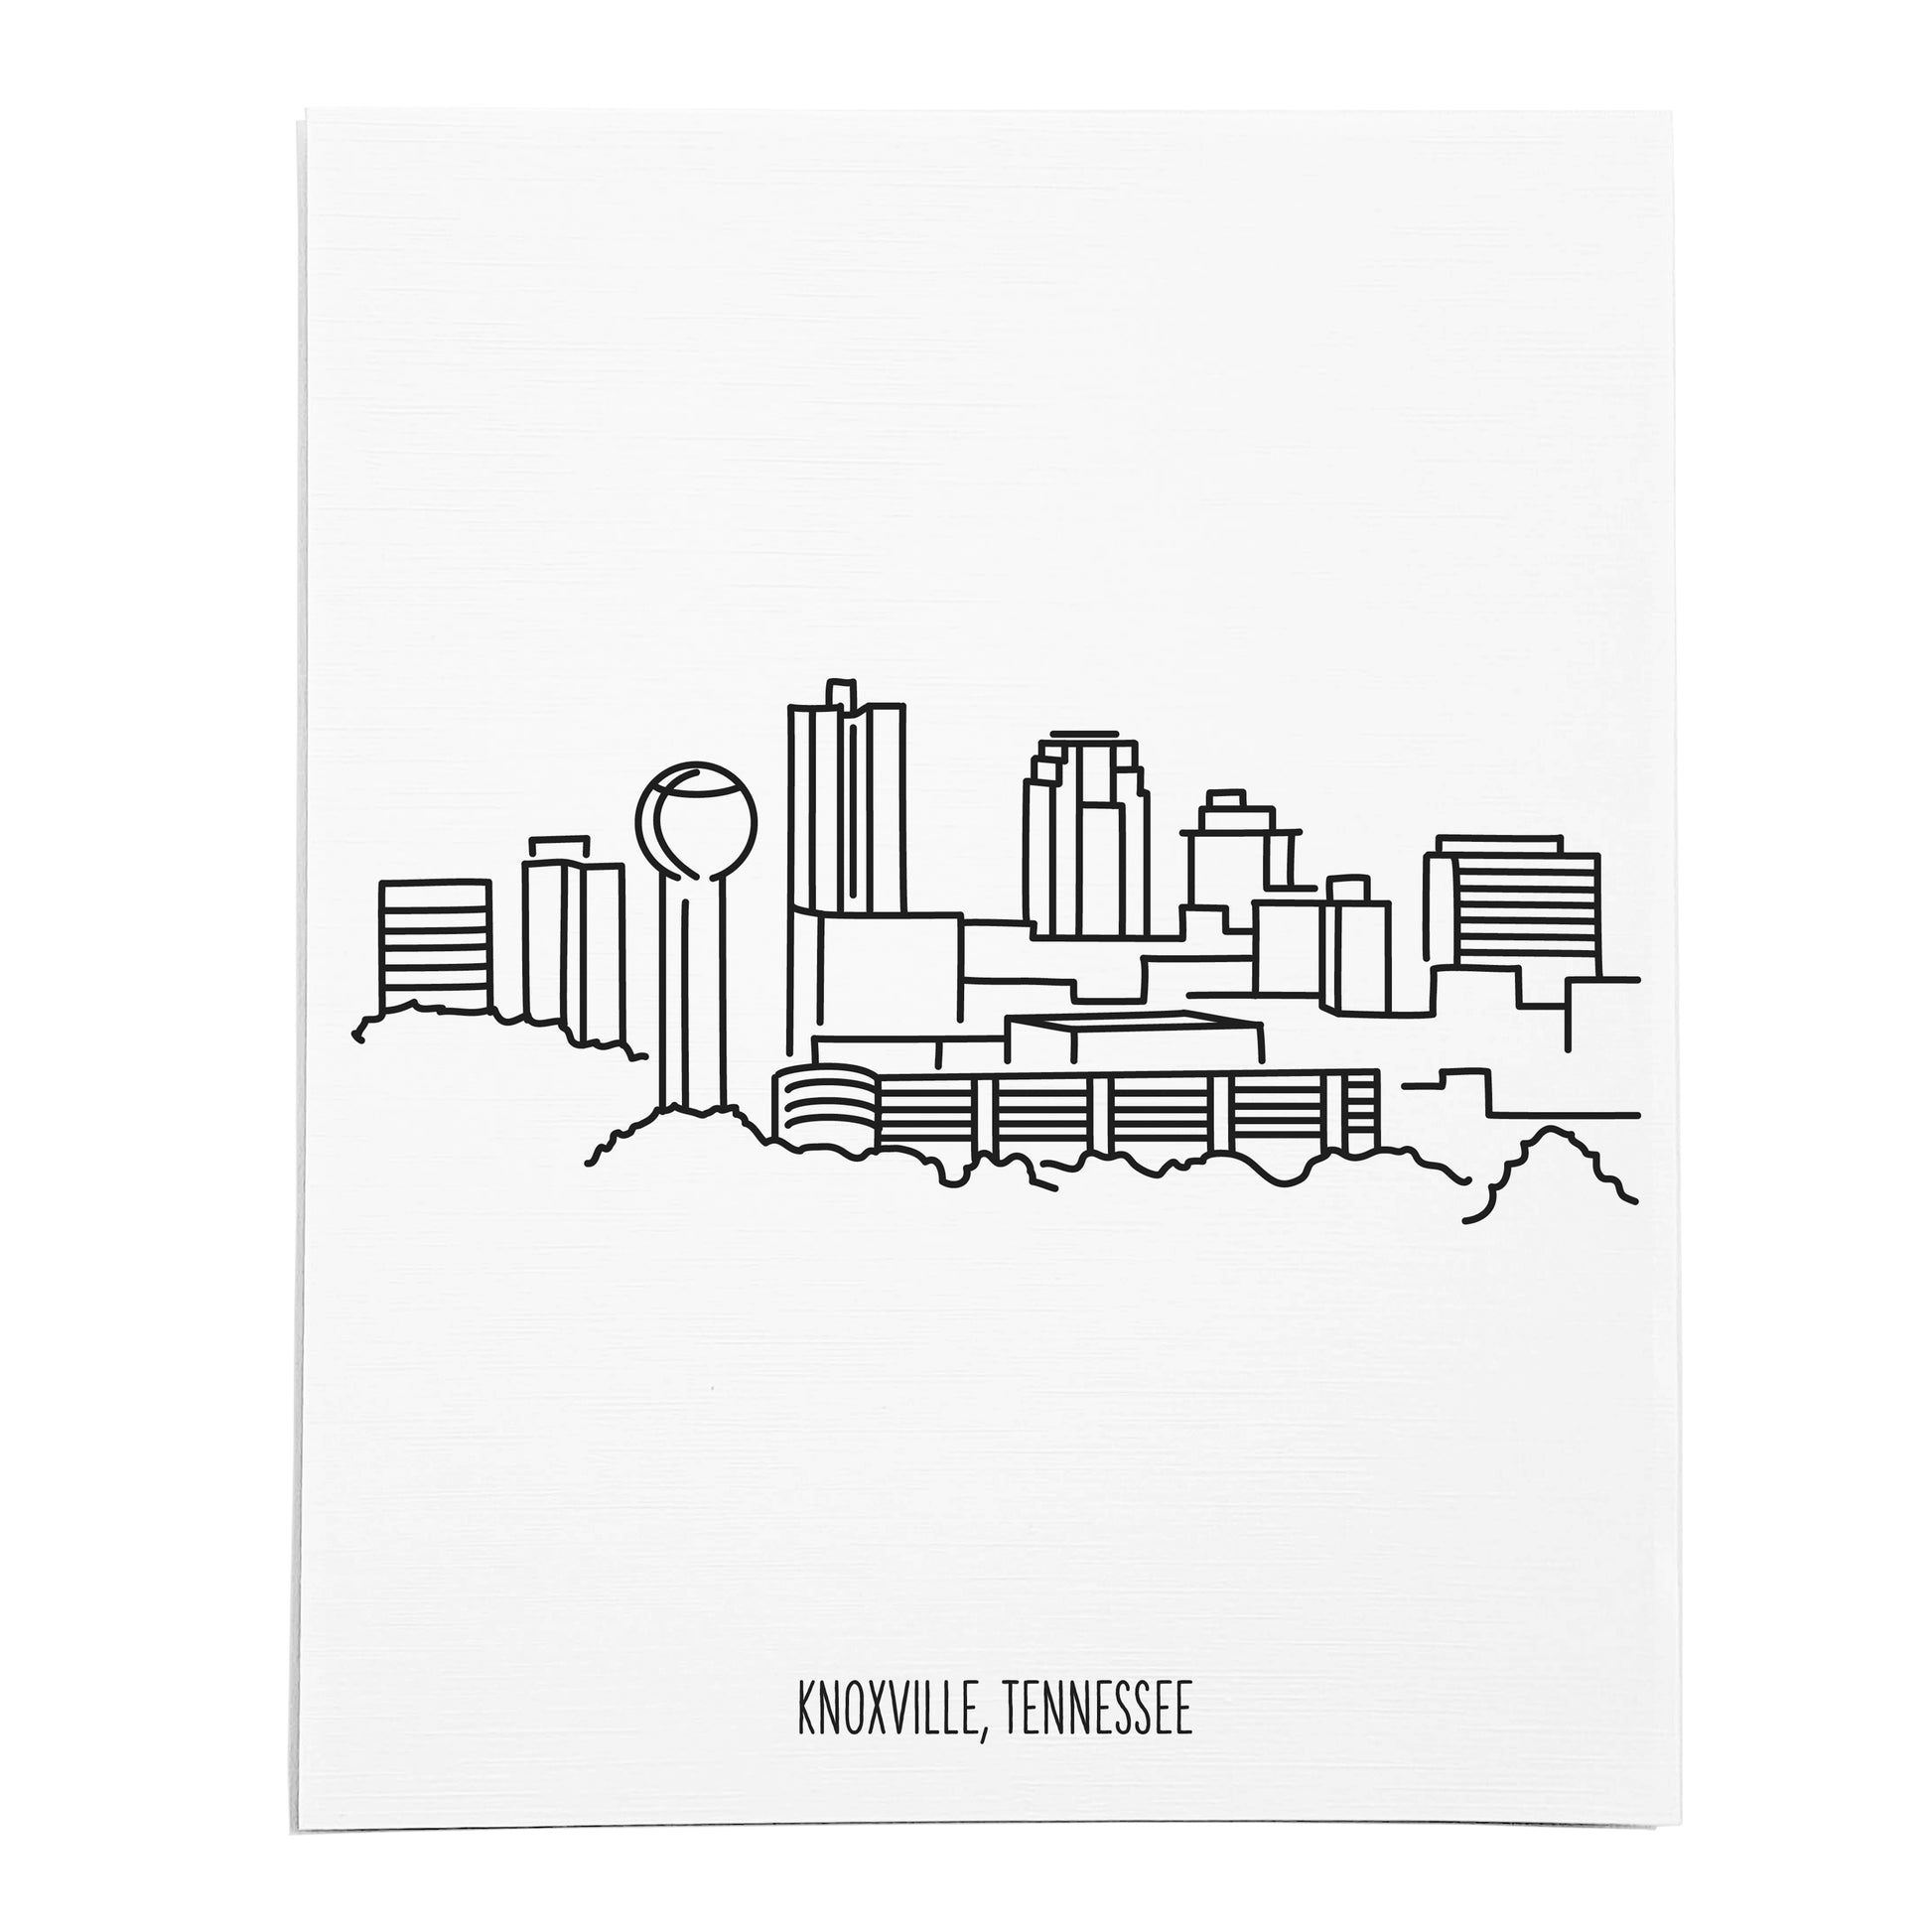 An art print featuring a line drawing of the Knoxville Skyline on white linen paper